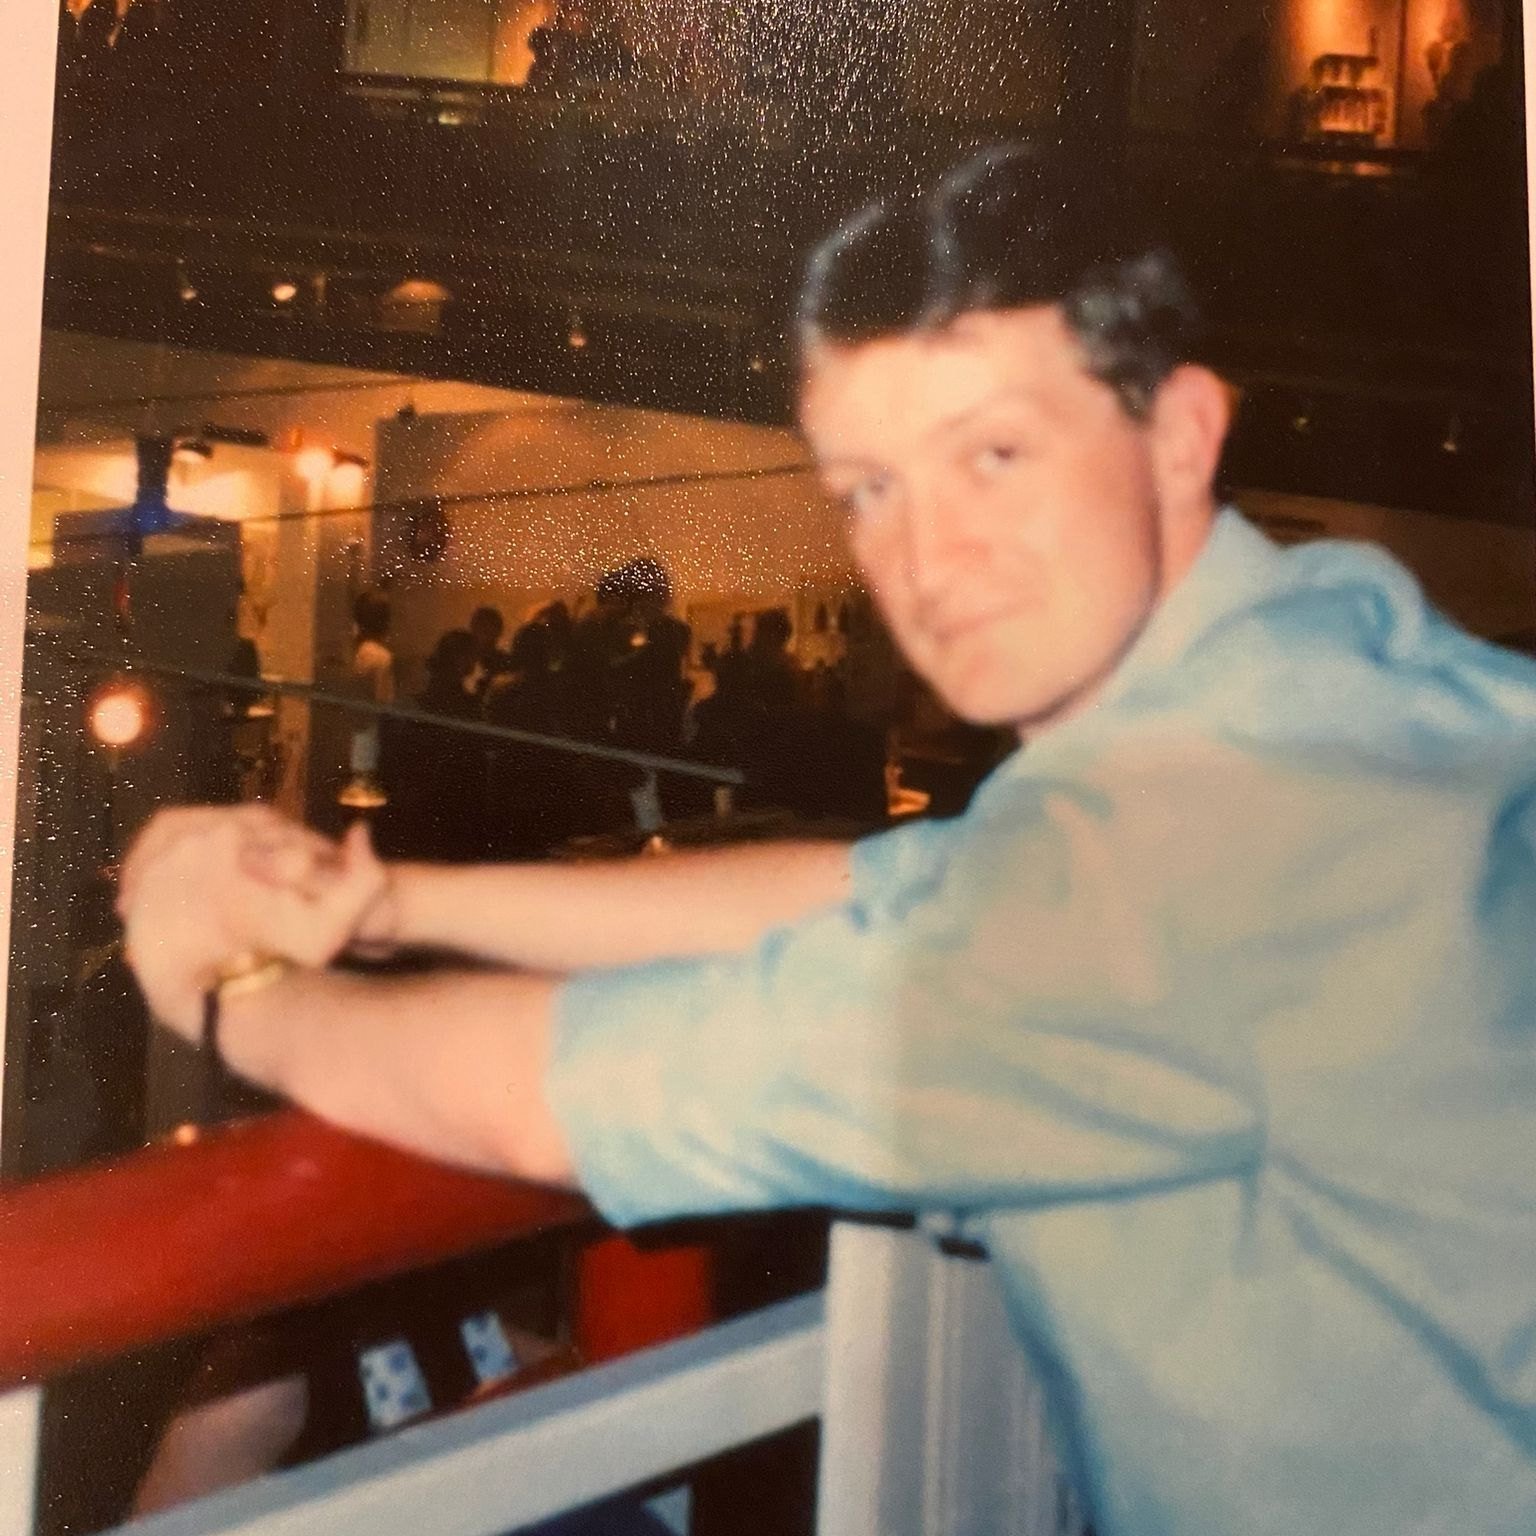 Reflecting back on how it all started, a fresh-faced Steve Green attending The Young Designer Show at the BCD, London, way back when! To now exhibiting at the VM &amp; Display Show and giving a talk in the @popaiuki zone as founder of Quagga Design a